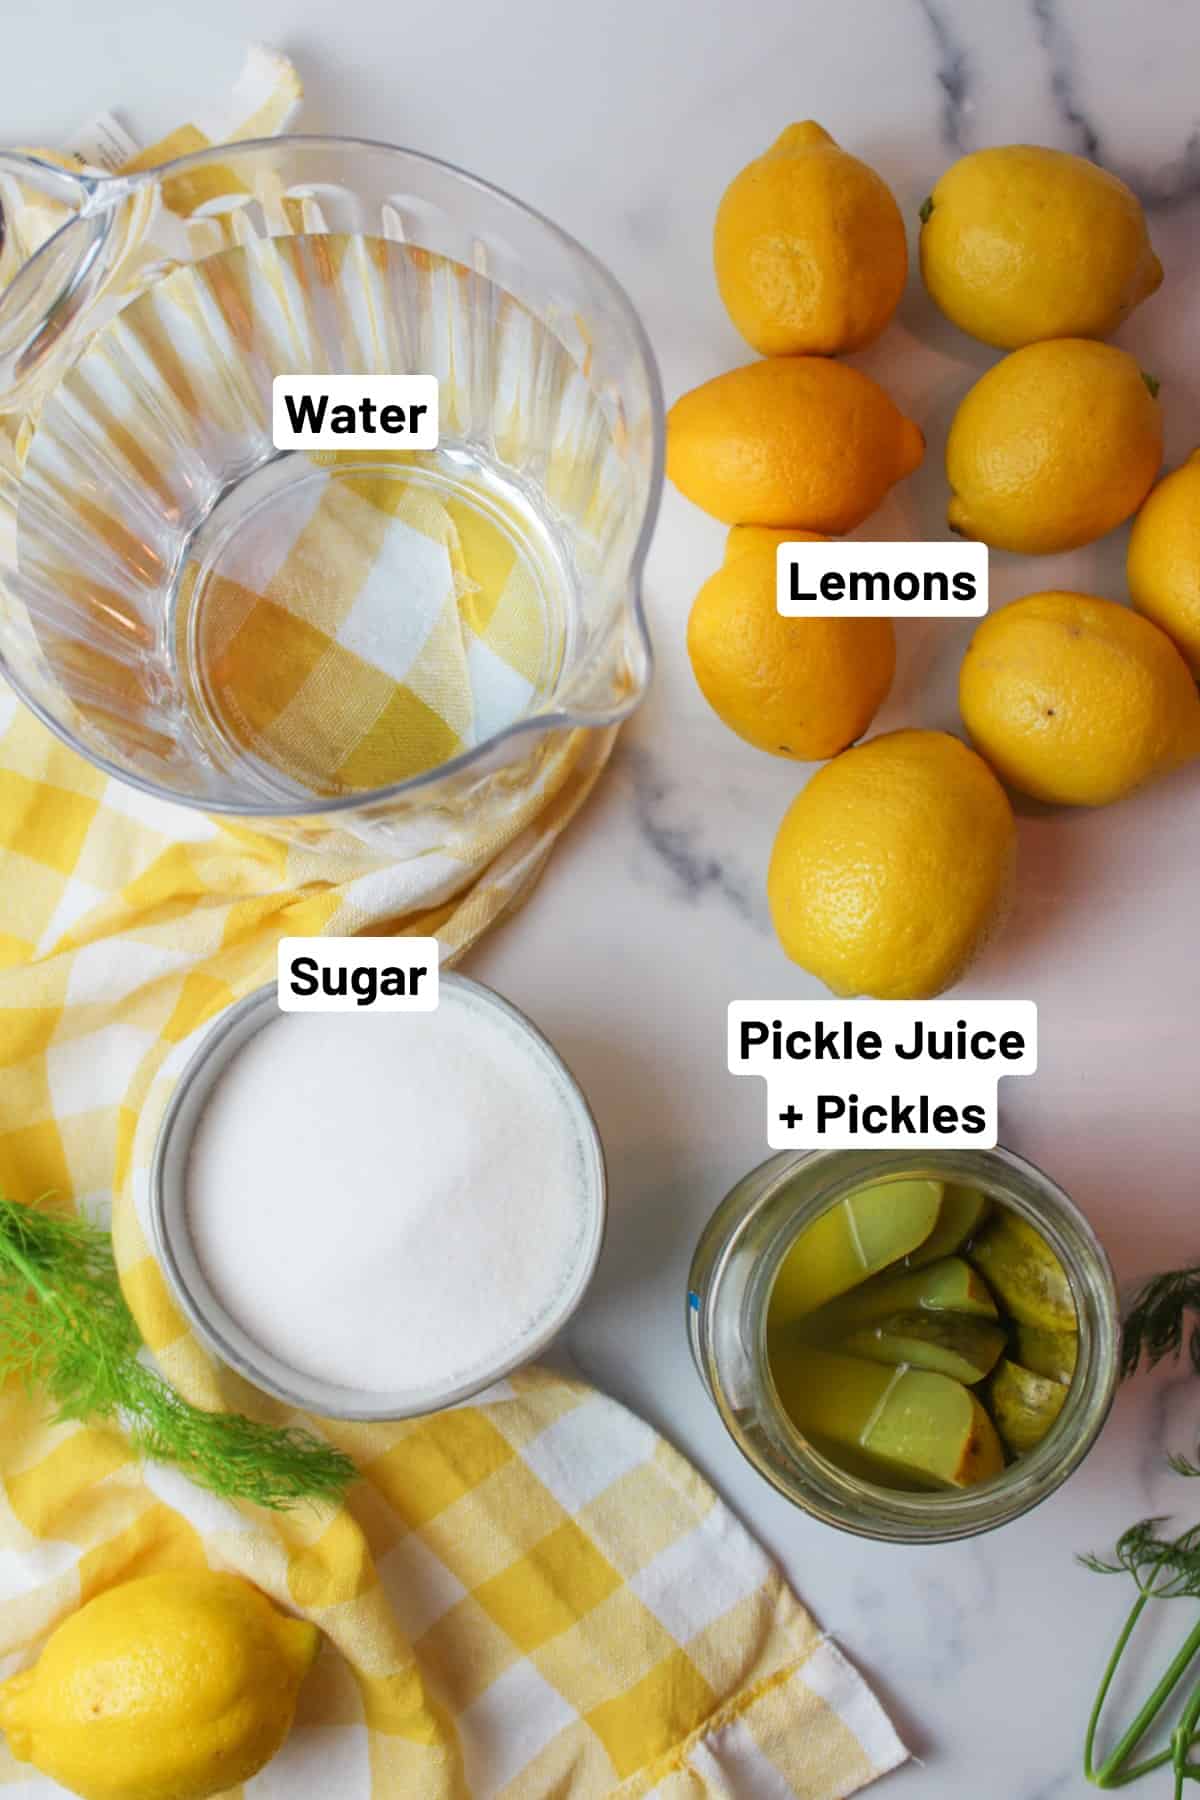 labeled ingredients needed to make dill pickle lemonade.